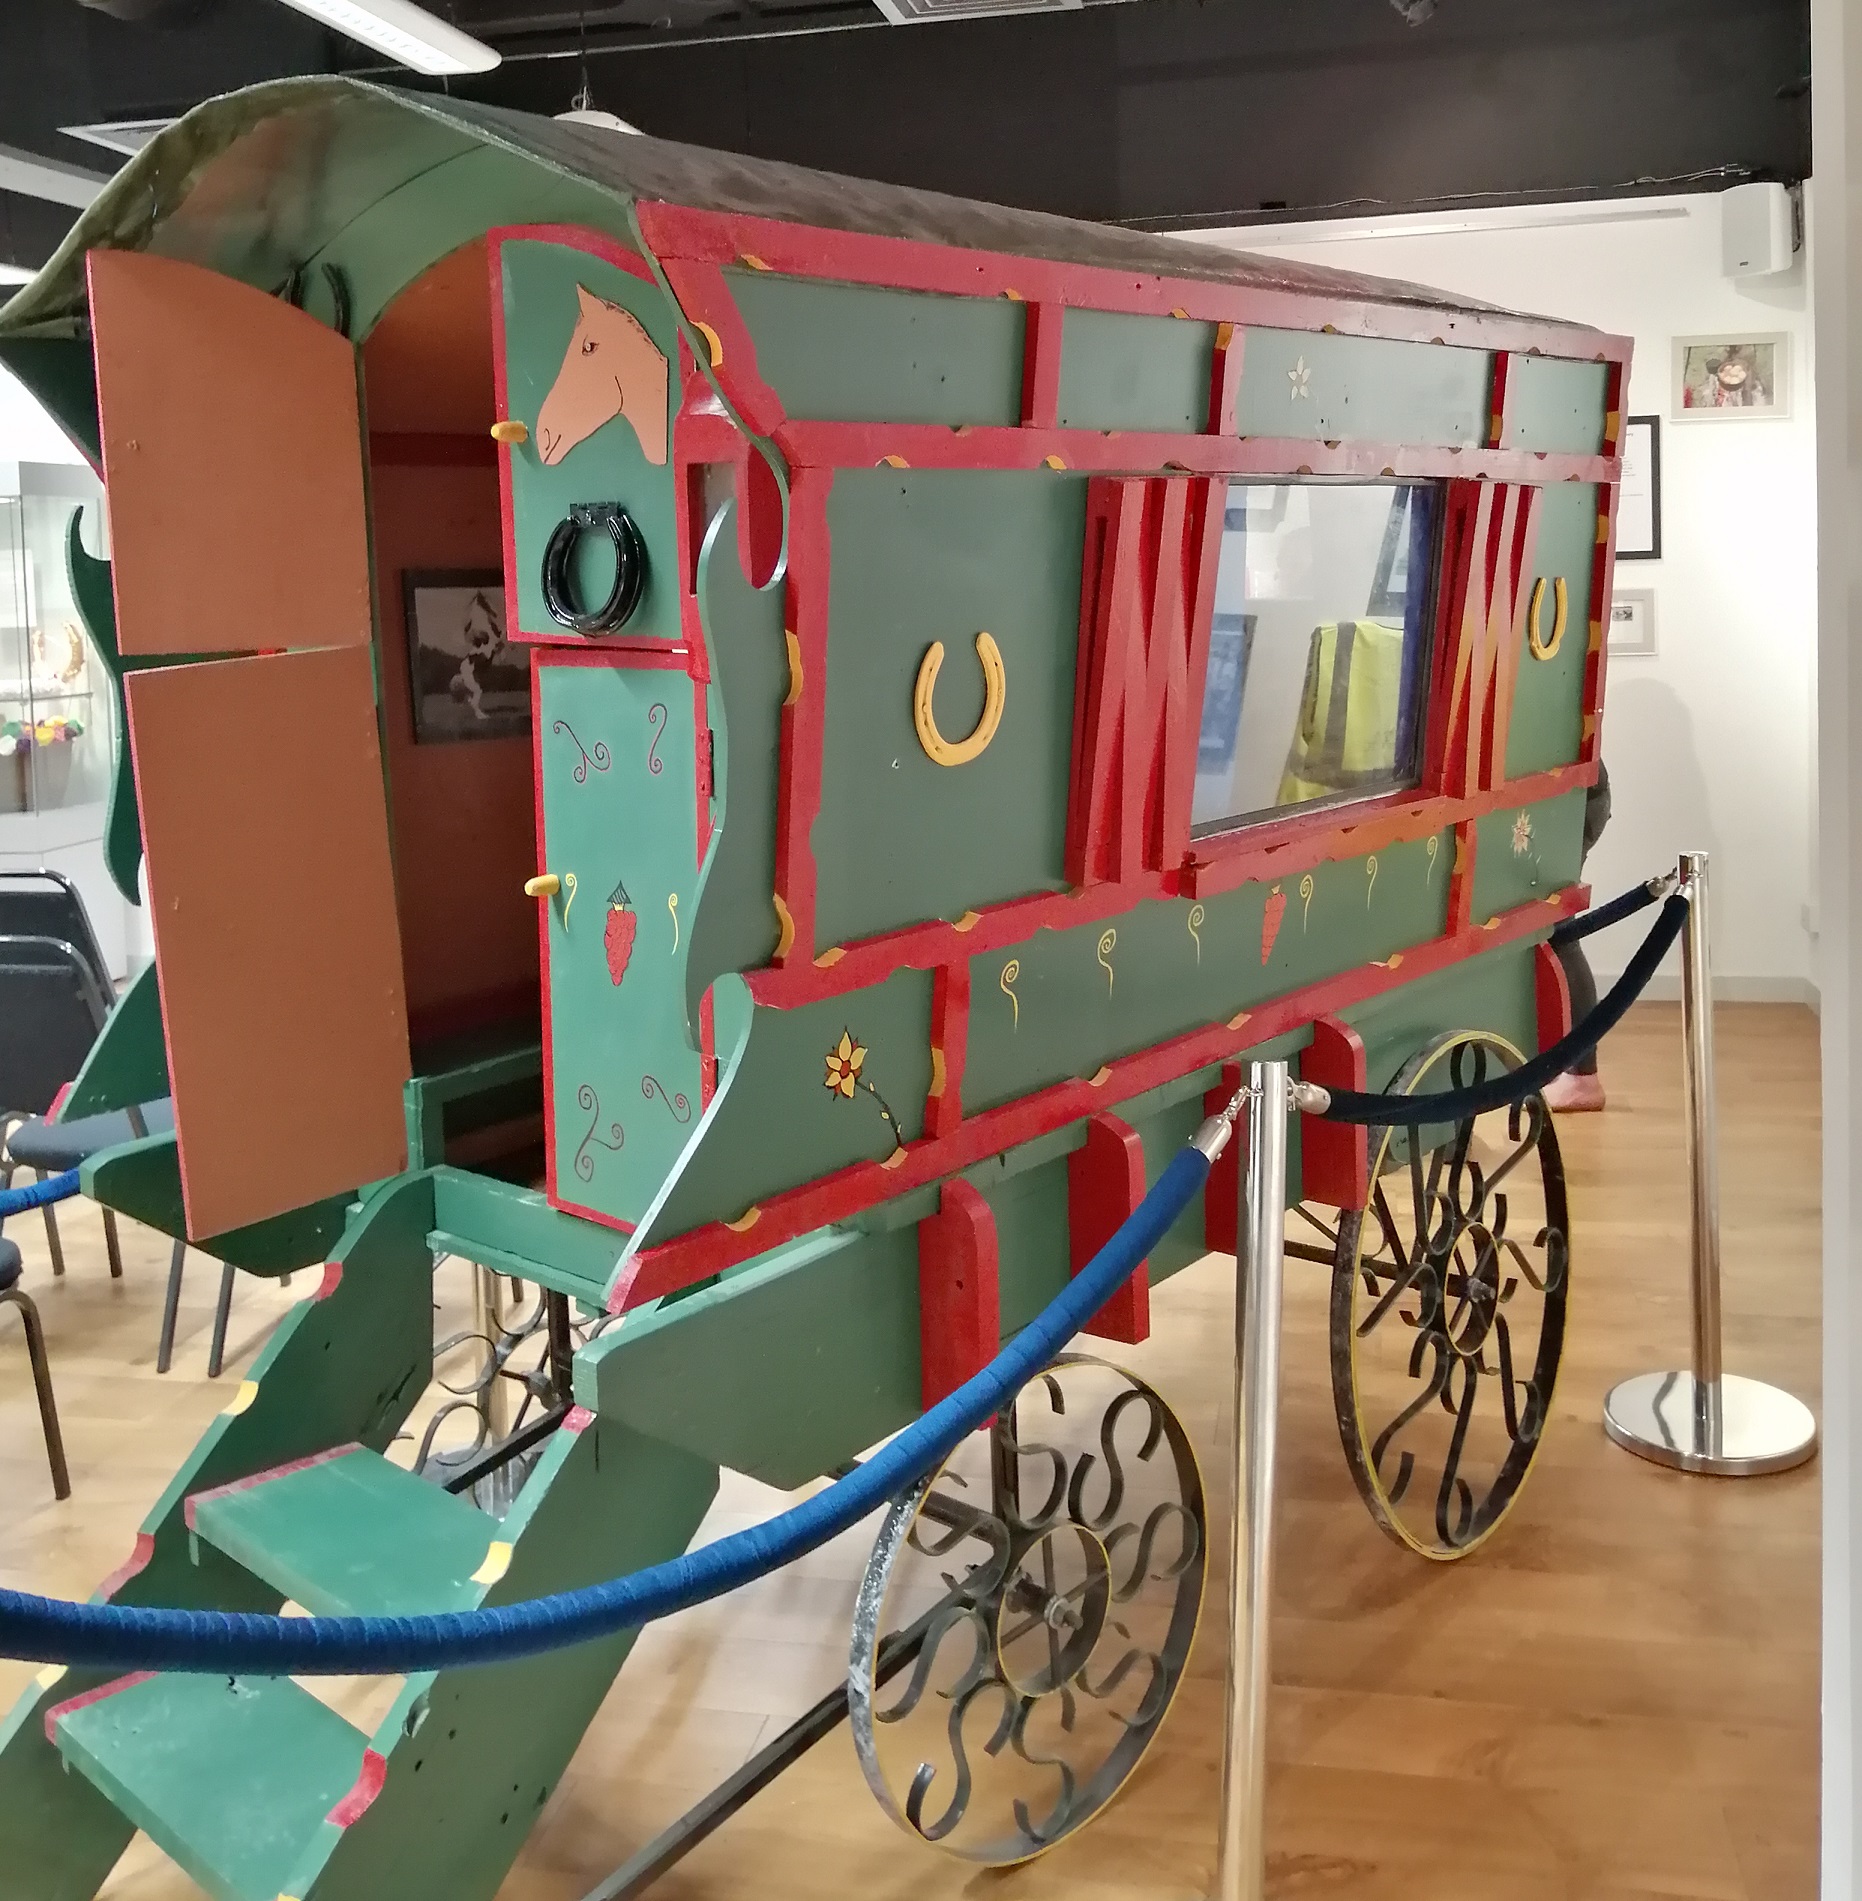 One of the replica caravans from the exhibition.